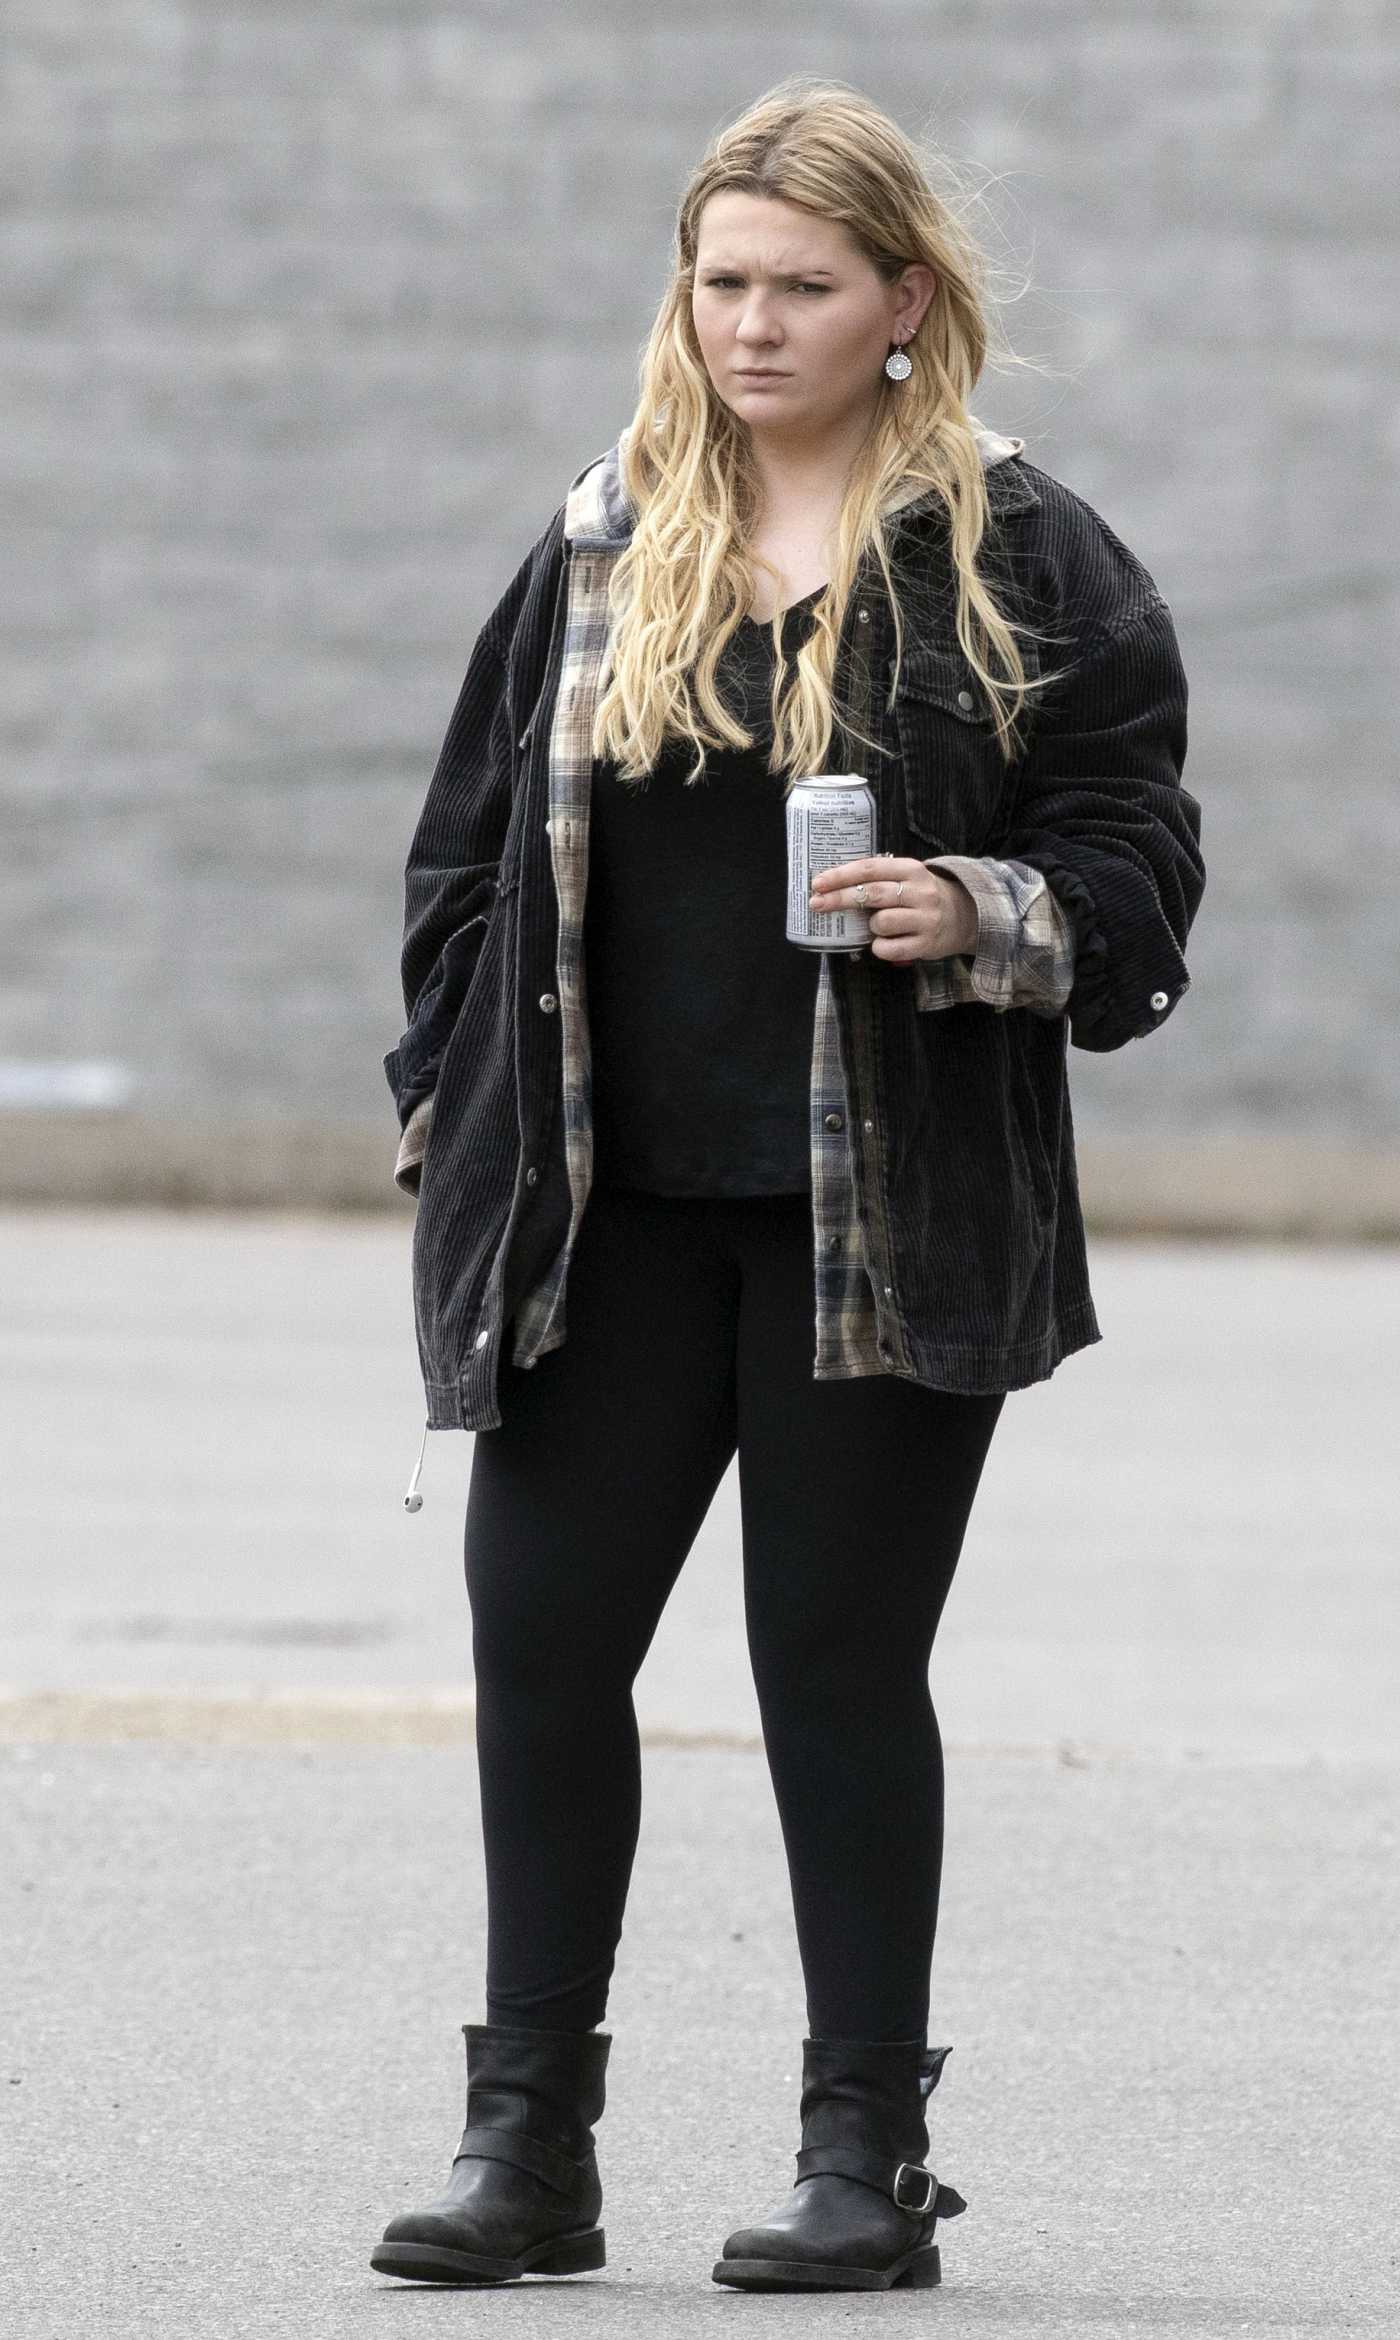 Abigail Breslin Was Spotted Filming the TV Series Accused in Toronto 06/03/2022